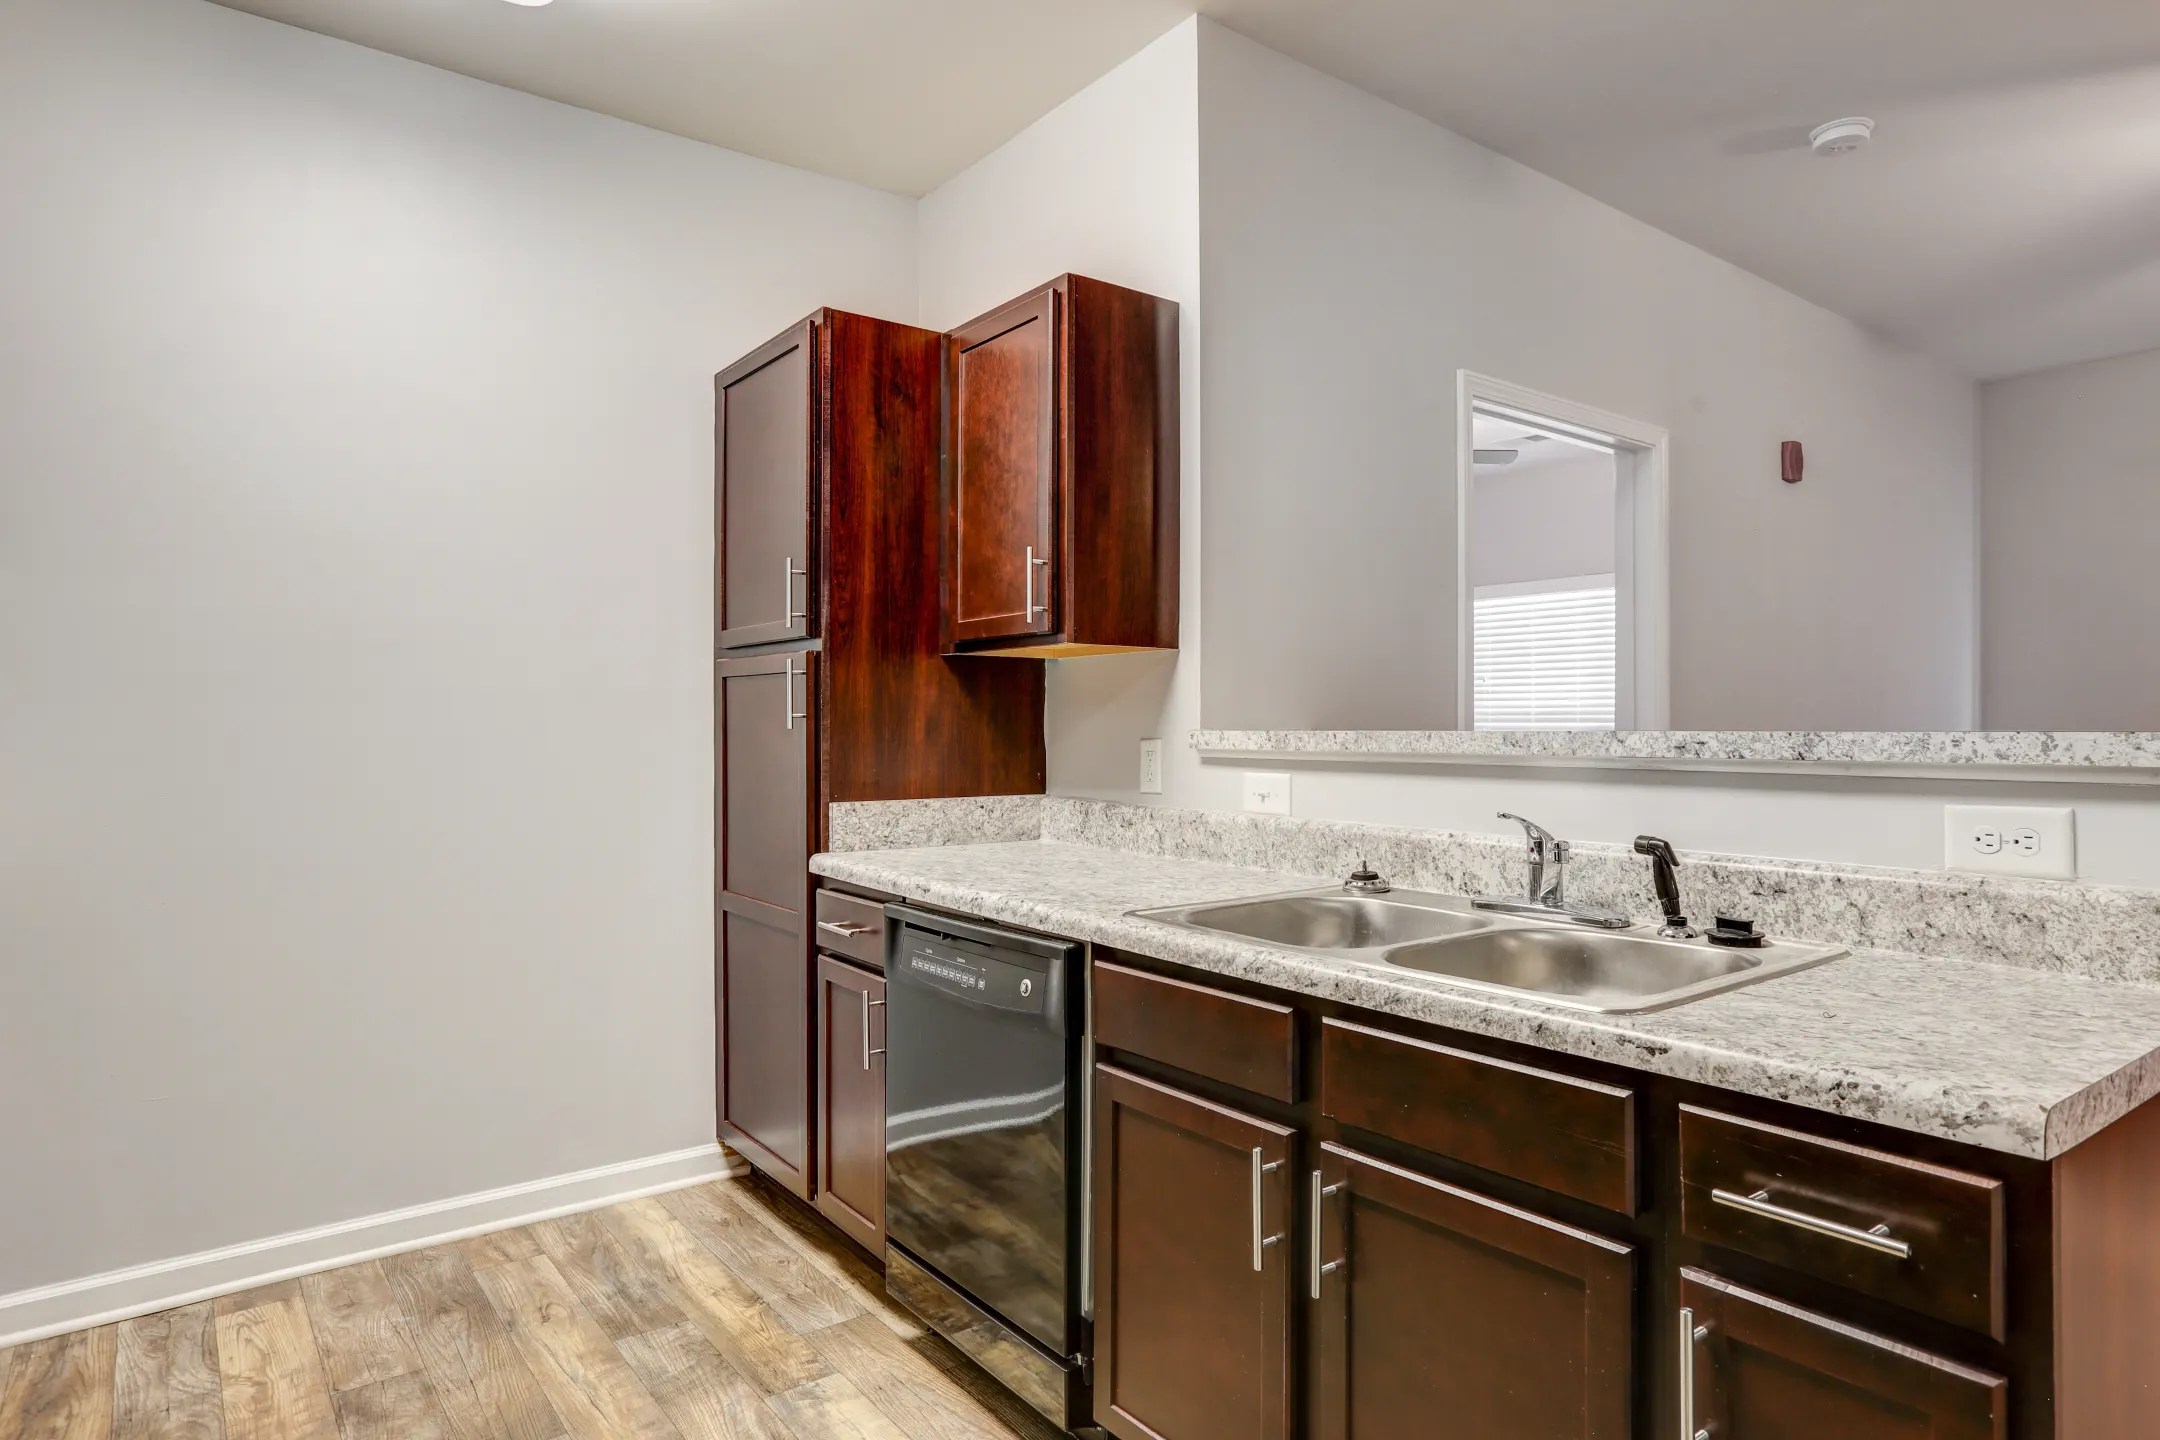 Kitchen - Assembly Apartments - Greenville, SC